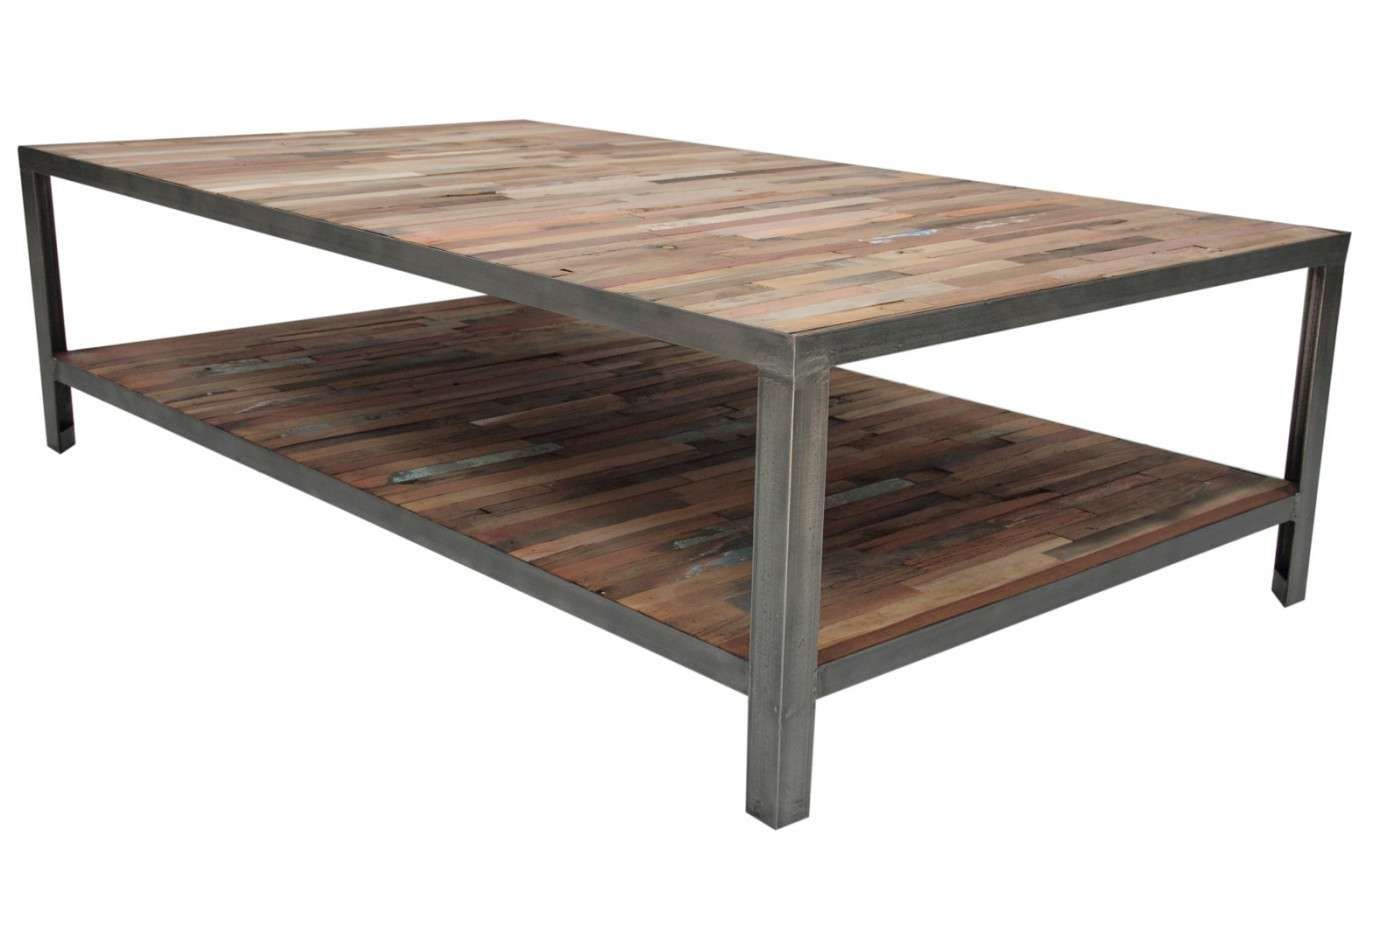 2018 Large Rectangular Coffee Tables Within Coffee Tables : Rectangle Coffee Table Rekarne Ikea Metal Best (View 1 of 20)